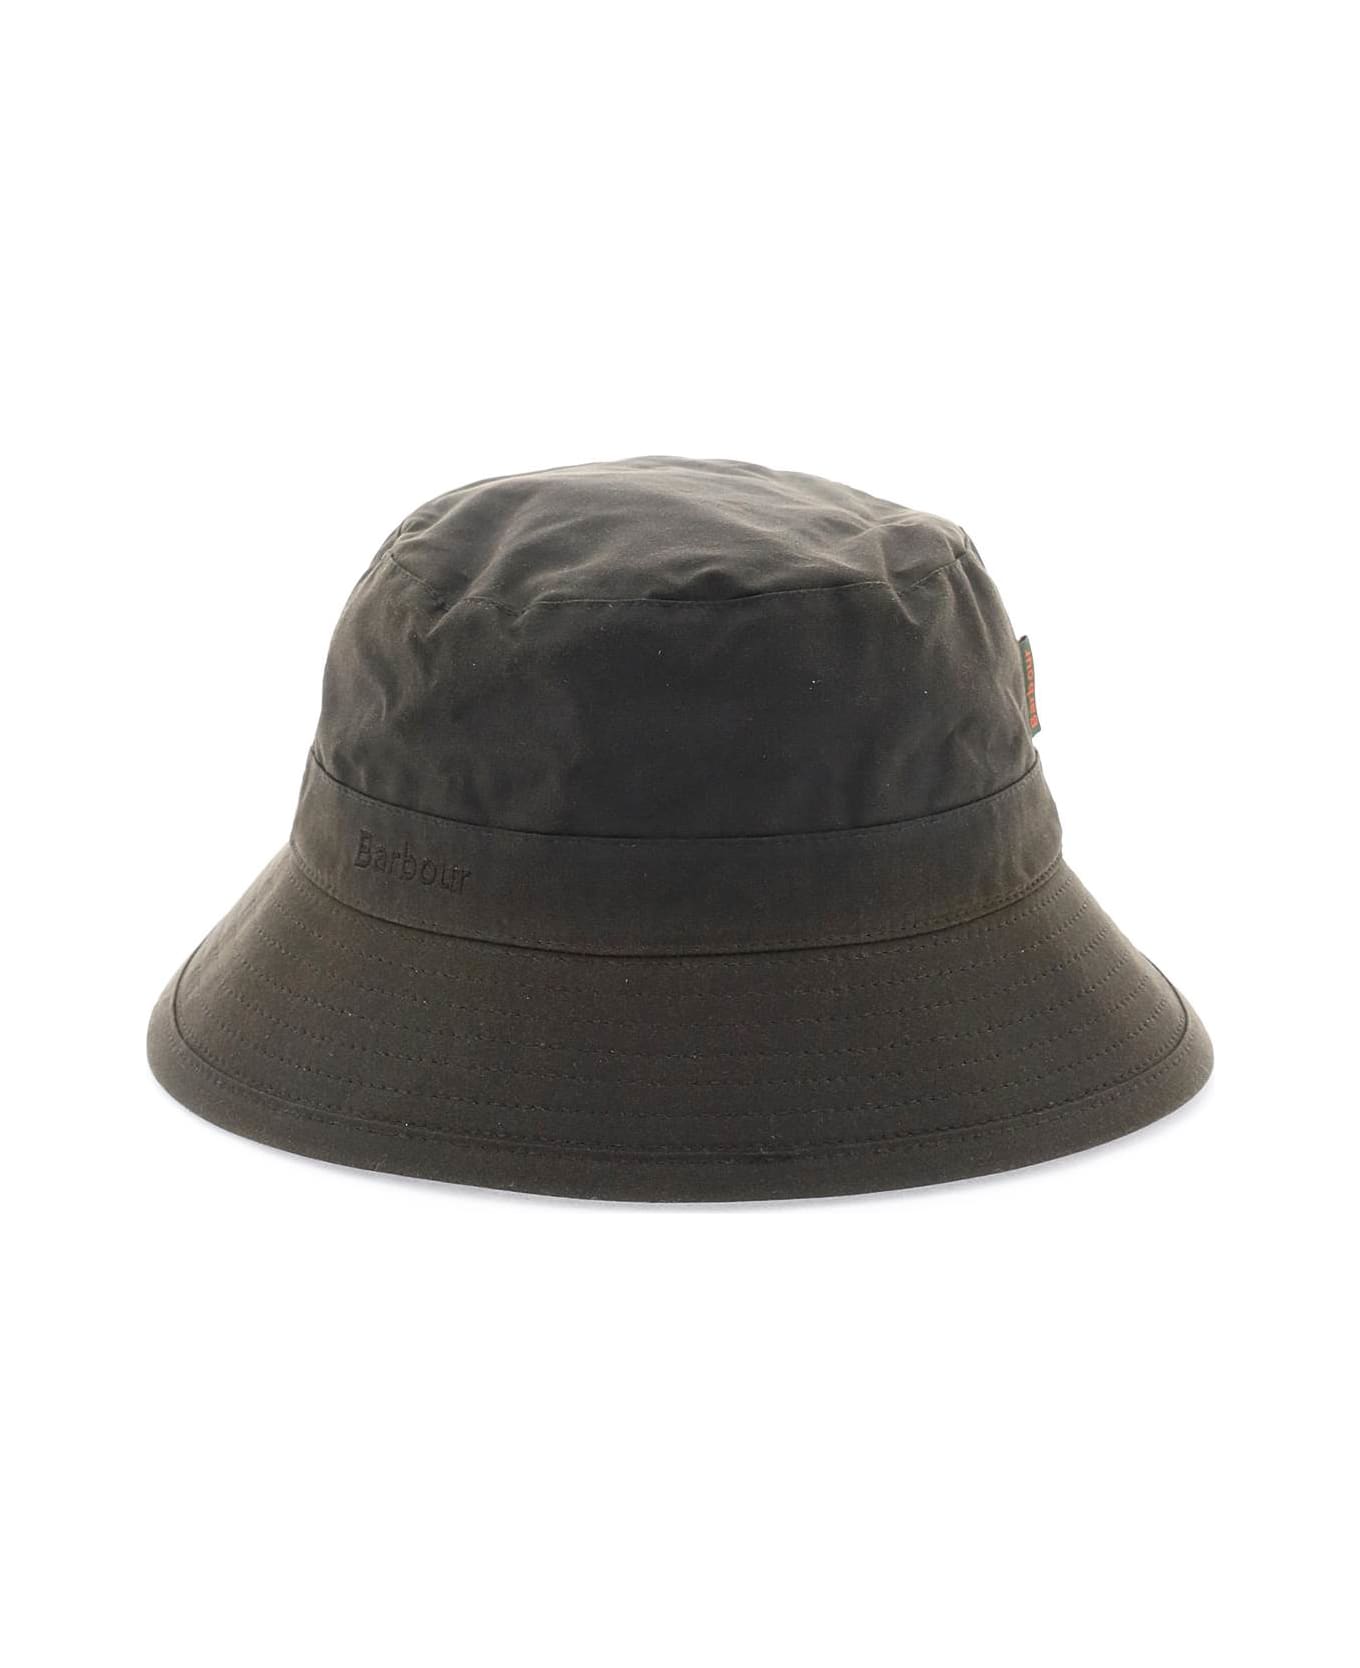 Barbour Waxed Bucket Hat - OLIVE (Brown) 帽子